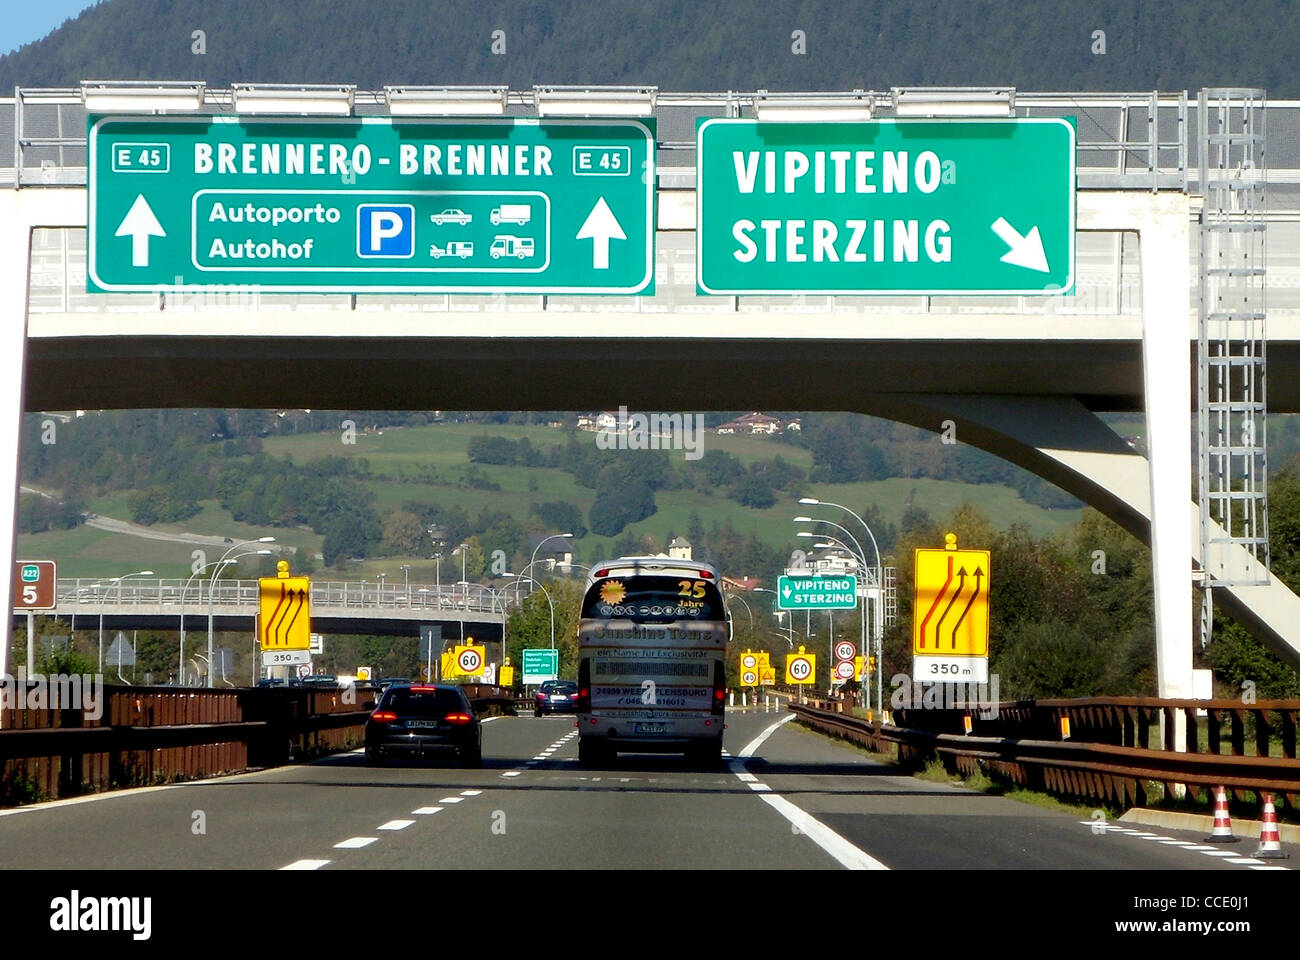 Motor traffic at the Italian tollhouse at the Brenner at Sterzing. Stock Photo